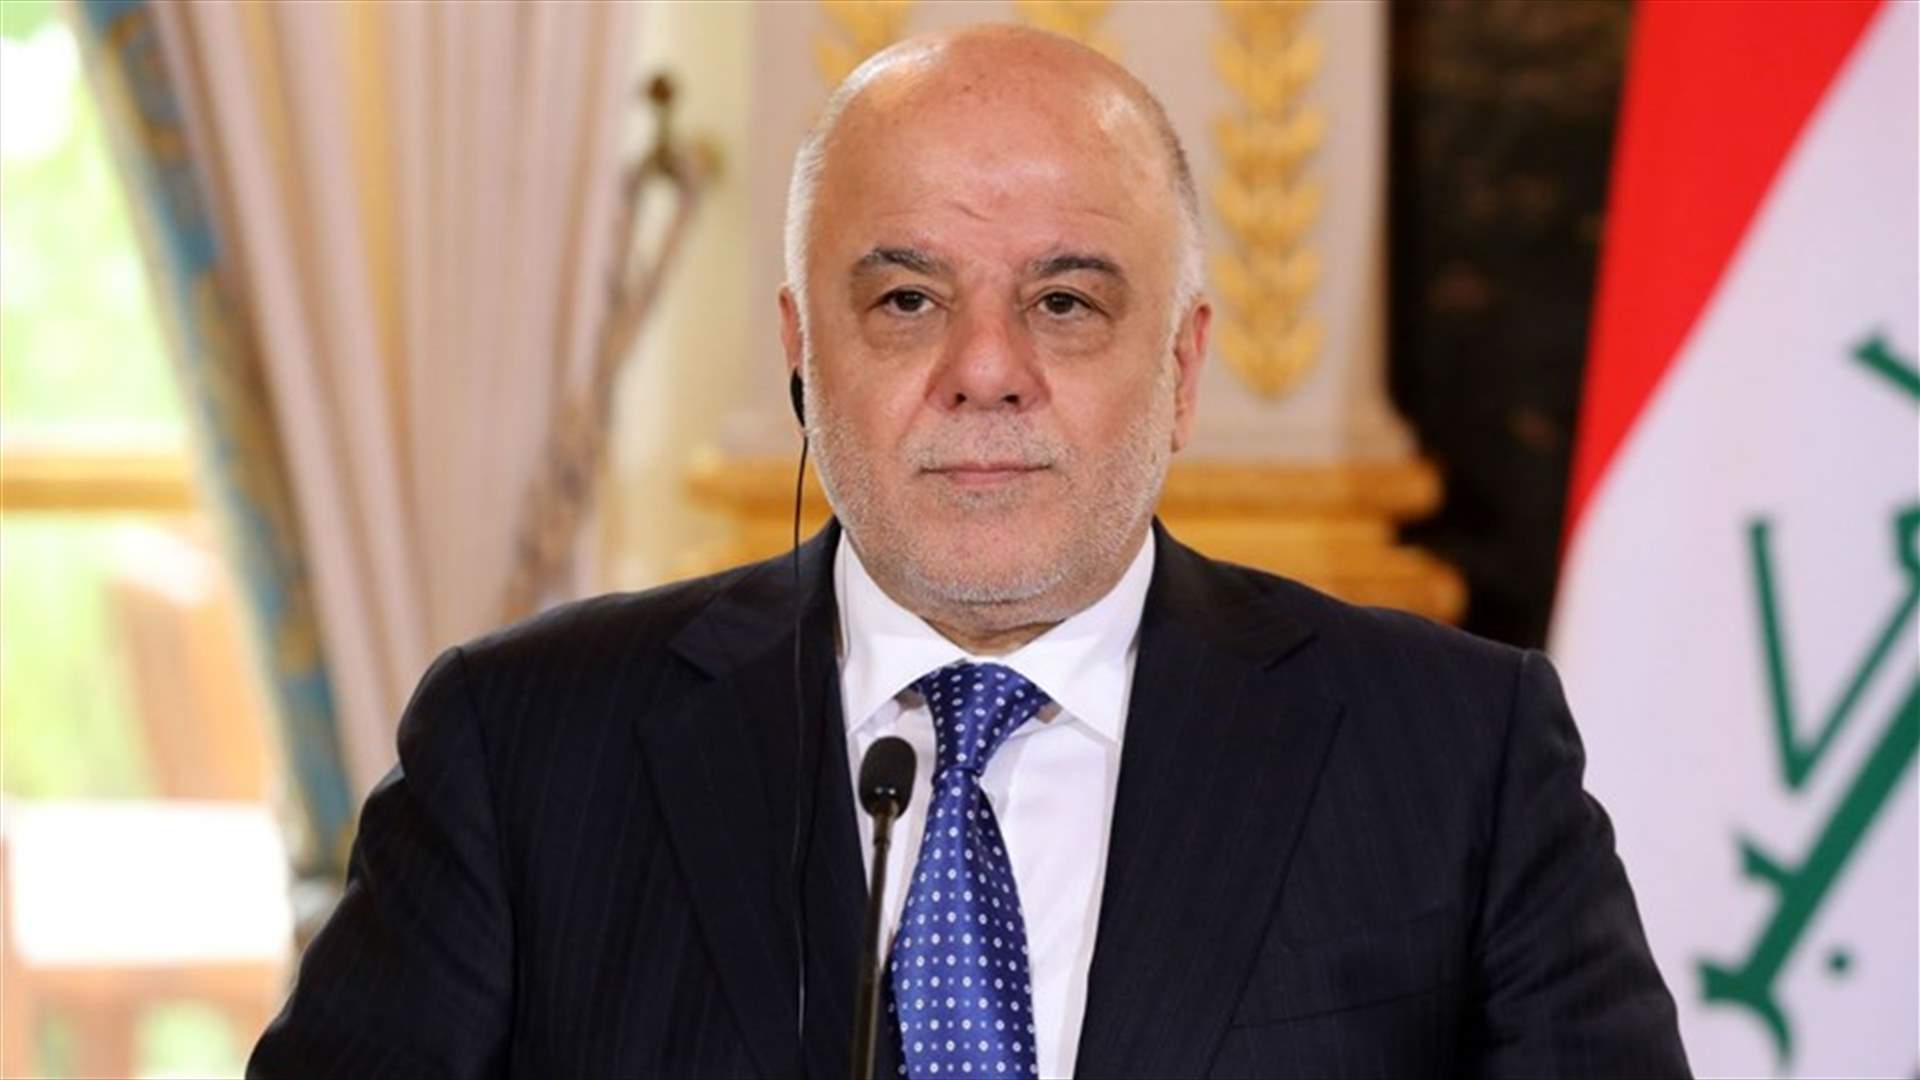 Iraqi air strike targets Islamic State position in Syria - PM